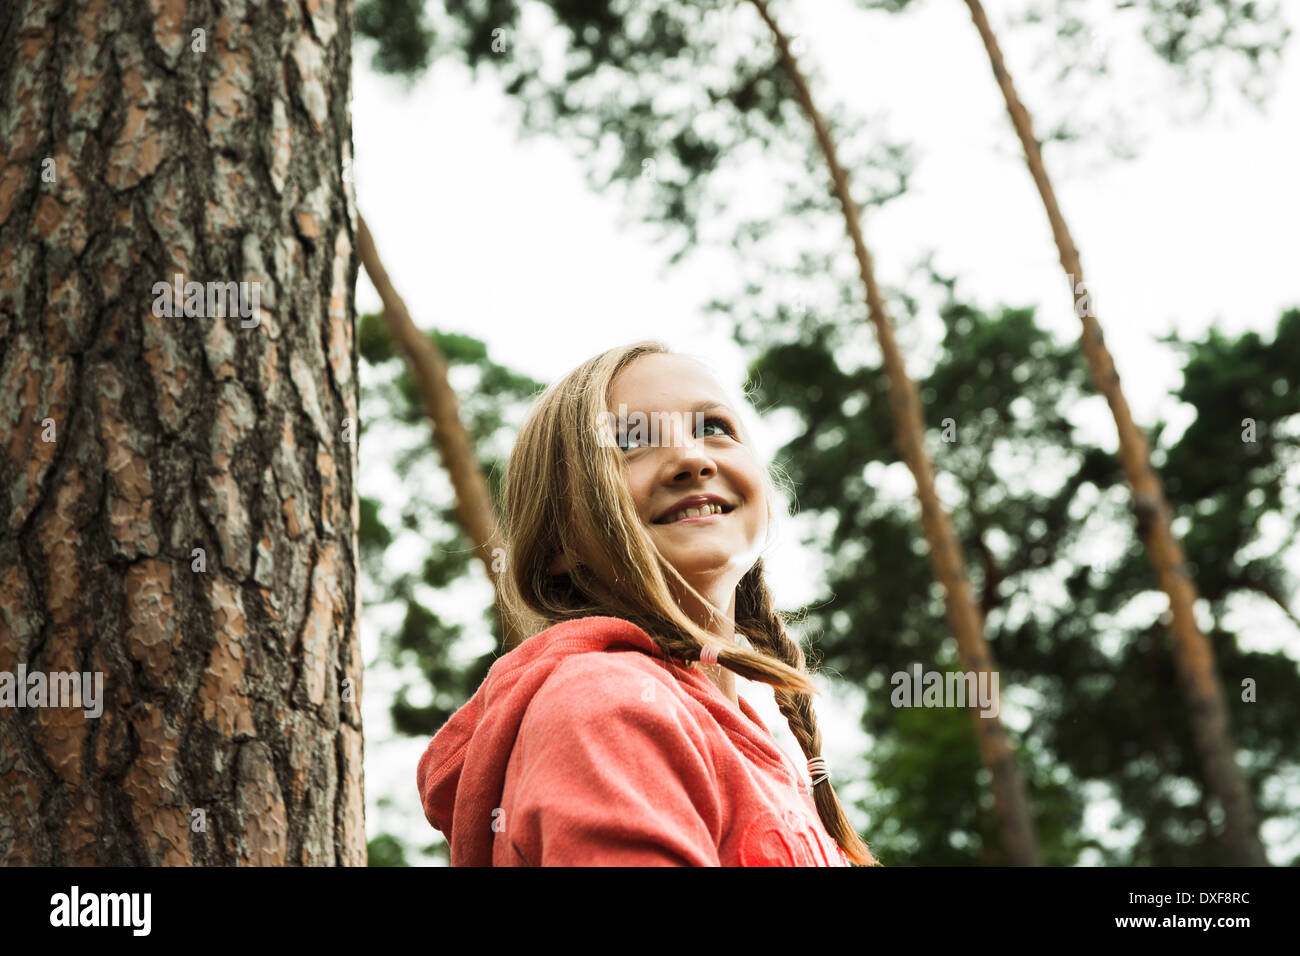 Portrait of girl standing next to tree in park, looking upward, Germany Stock Photo